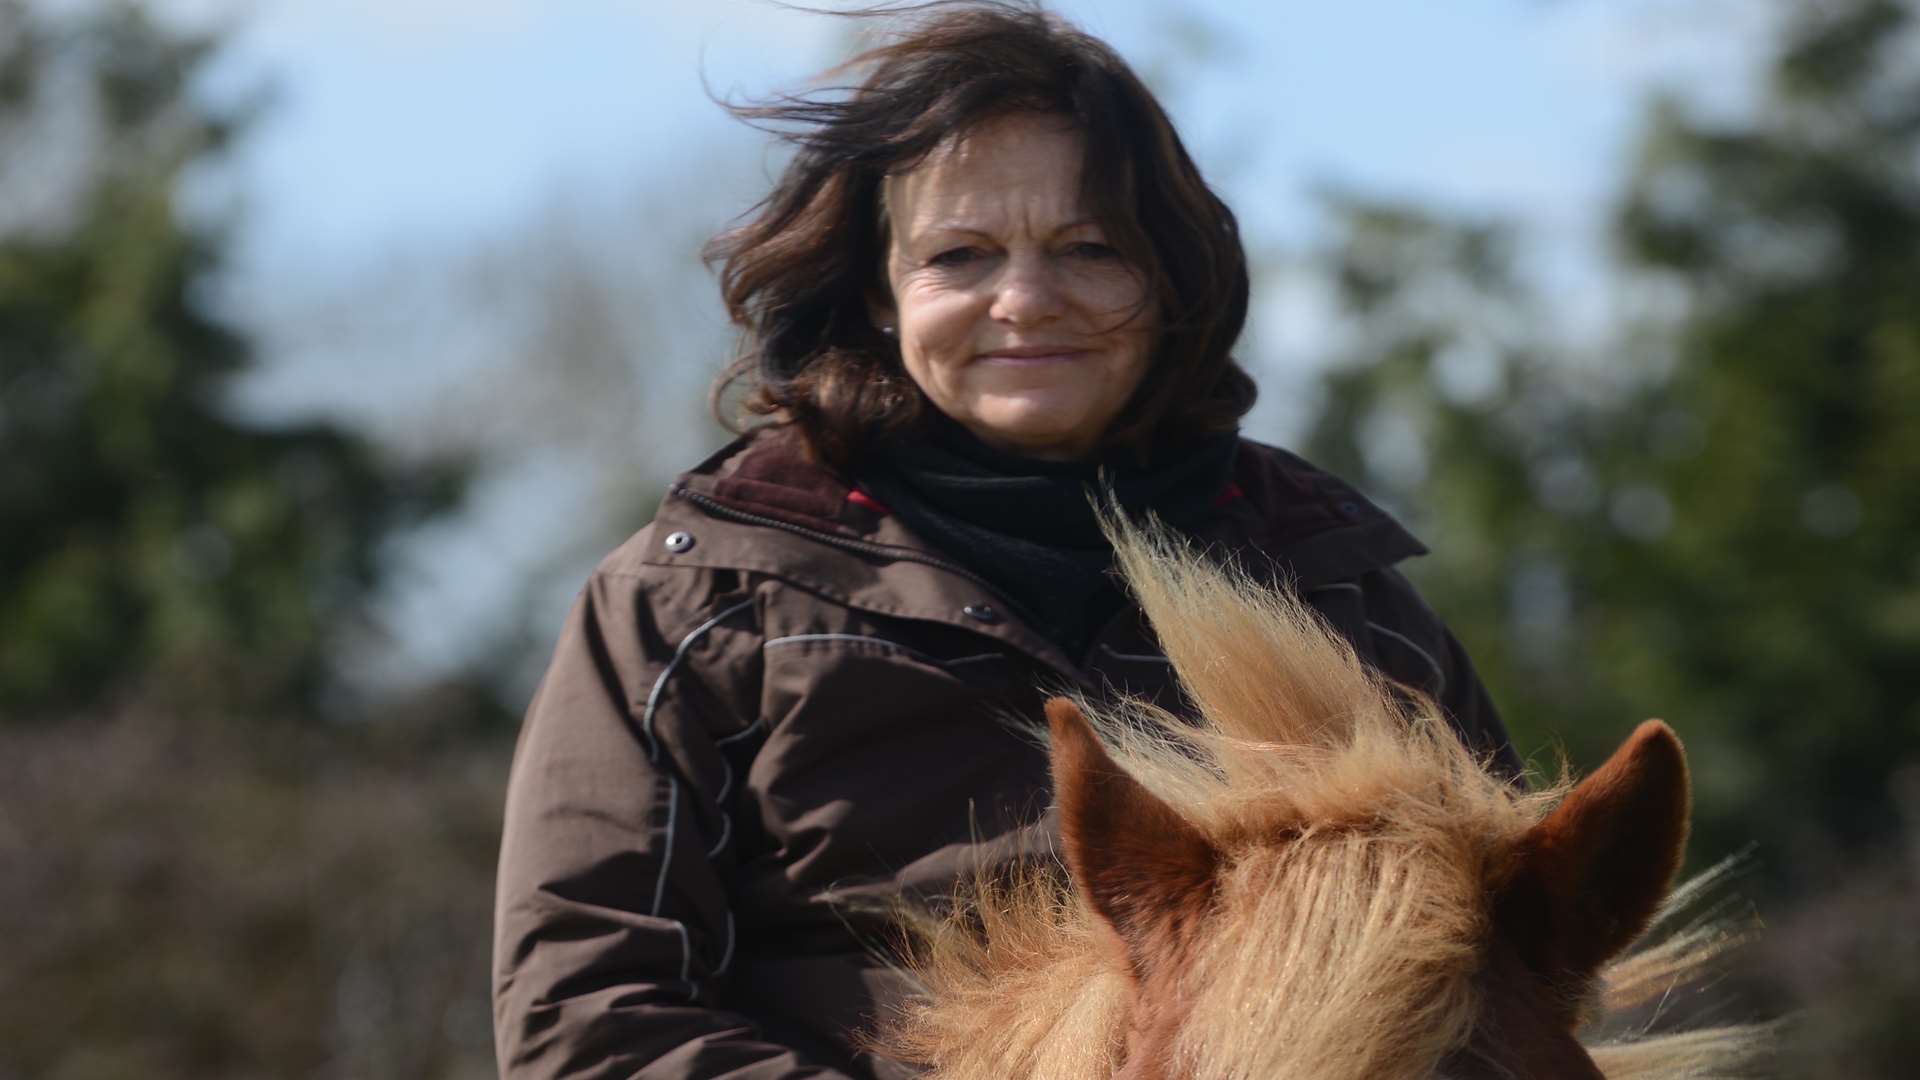 Cathy Sugden and her horse Mr Smiffy who gave chase across the Romney Marsh